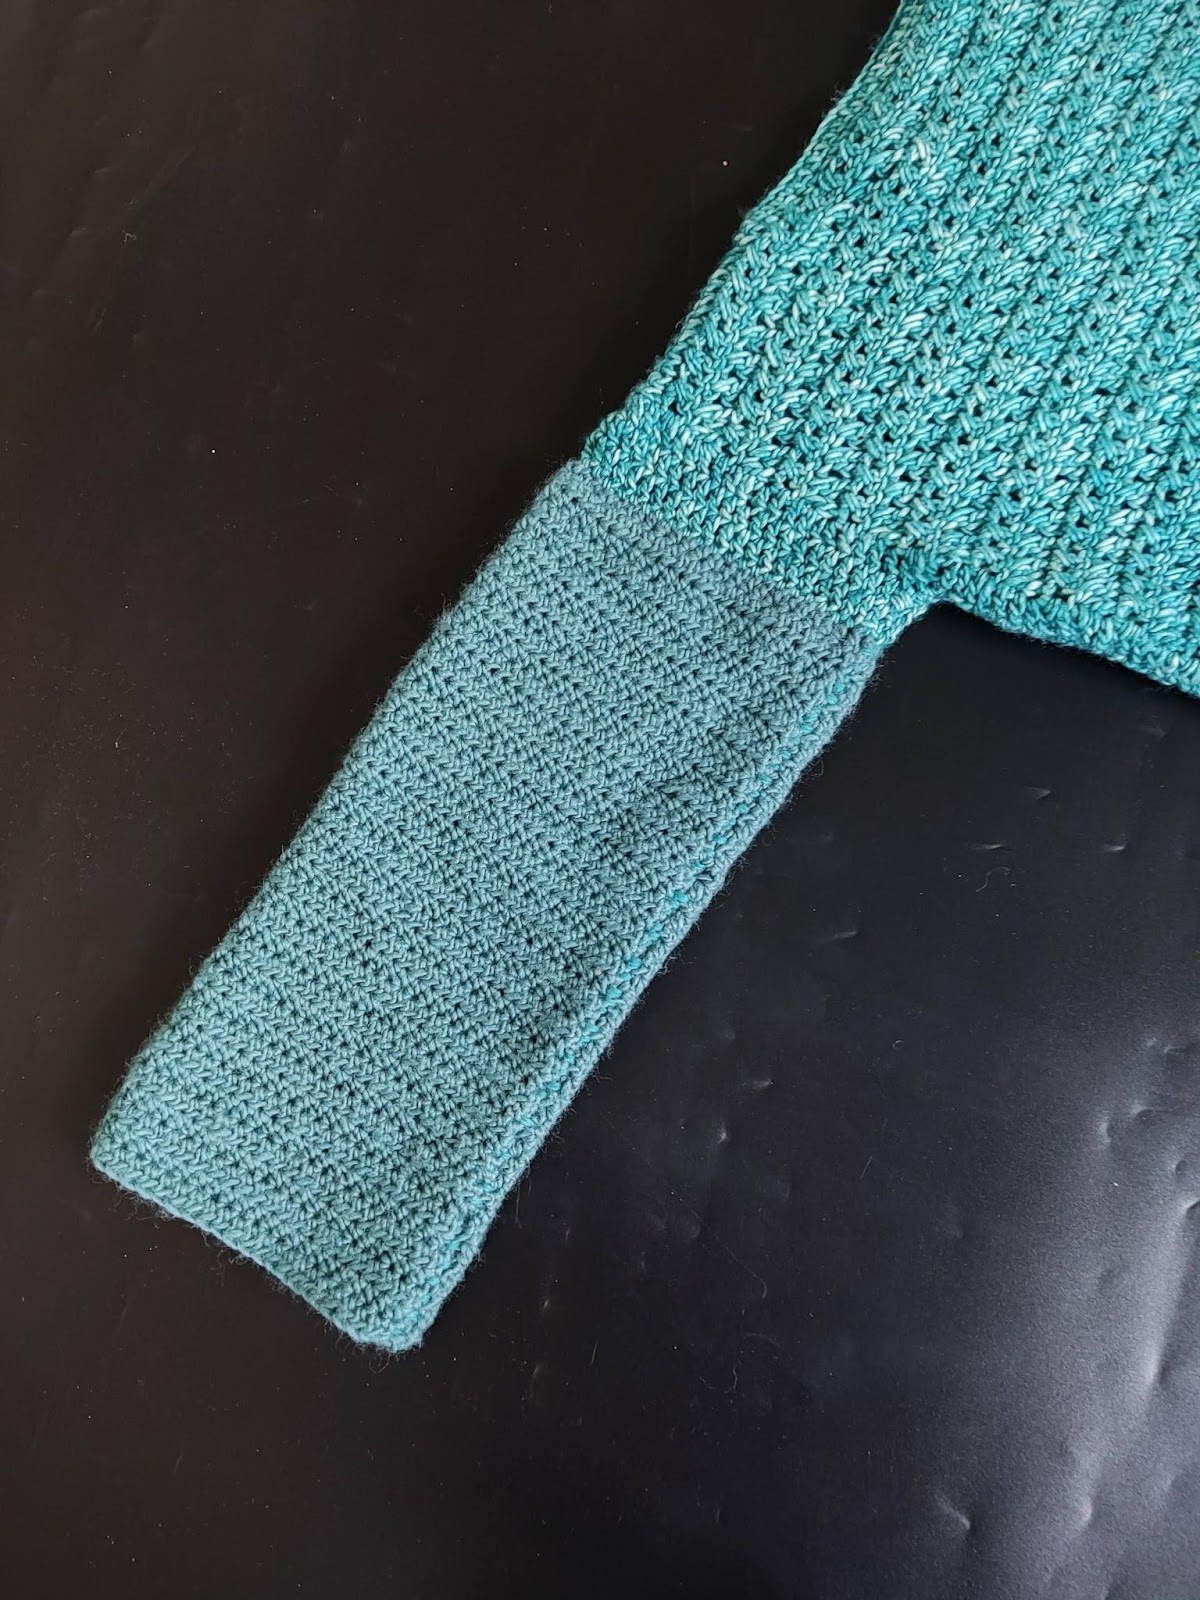 BEGINNER’S GUIDE TO CROCHETING  
 A SWEATER